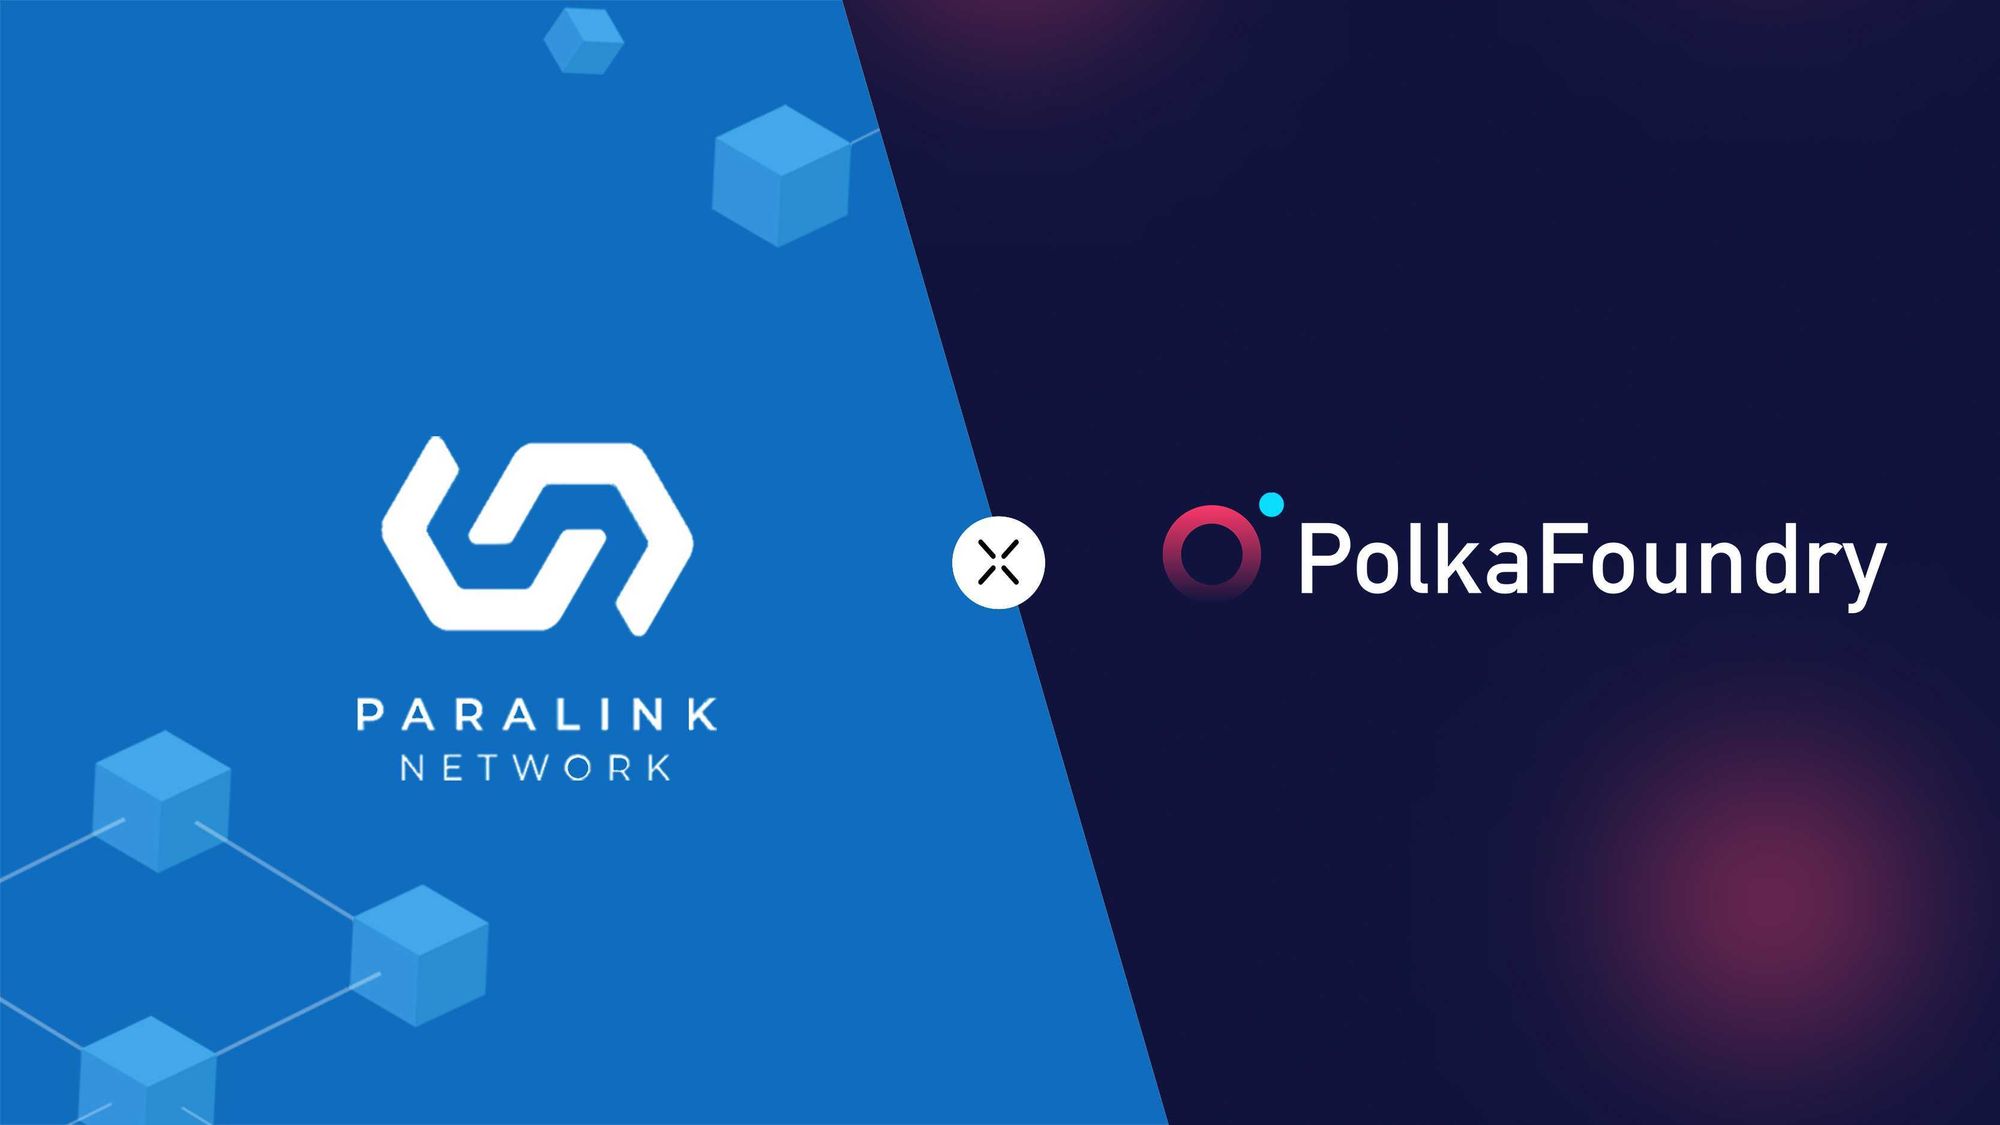 Paralink Network announces a Strategic Partnership with PolkaFoundry to support DeFi Dapps with reliable data